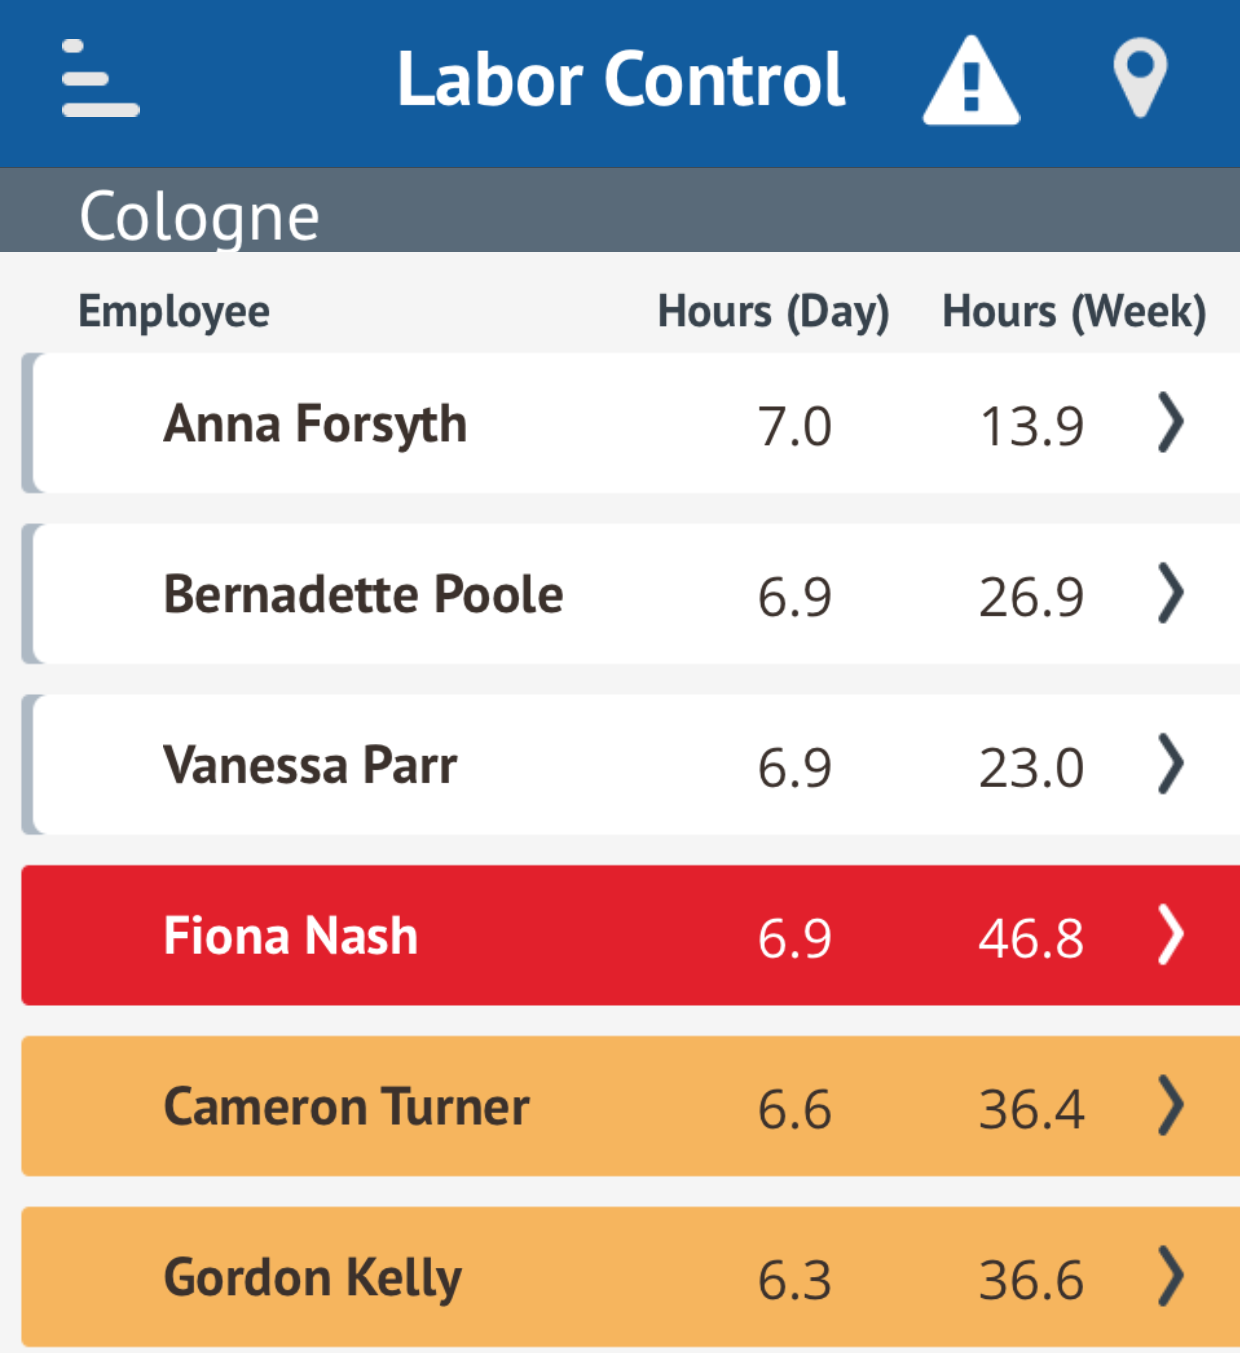 This image shows the Labor Control screen.